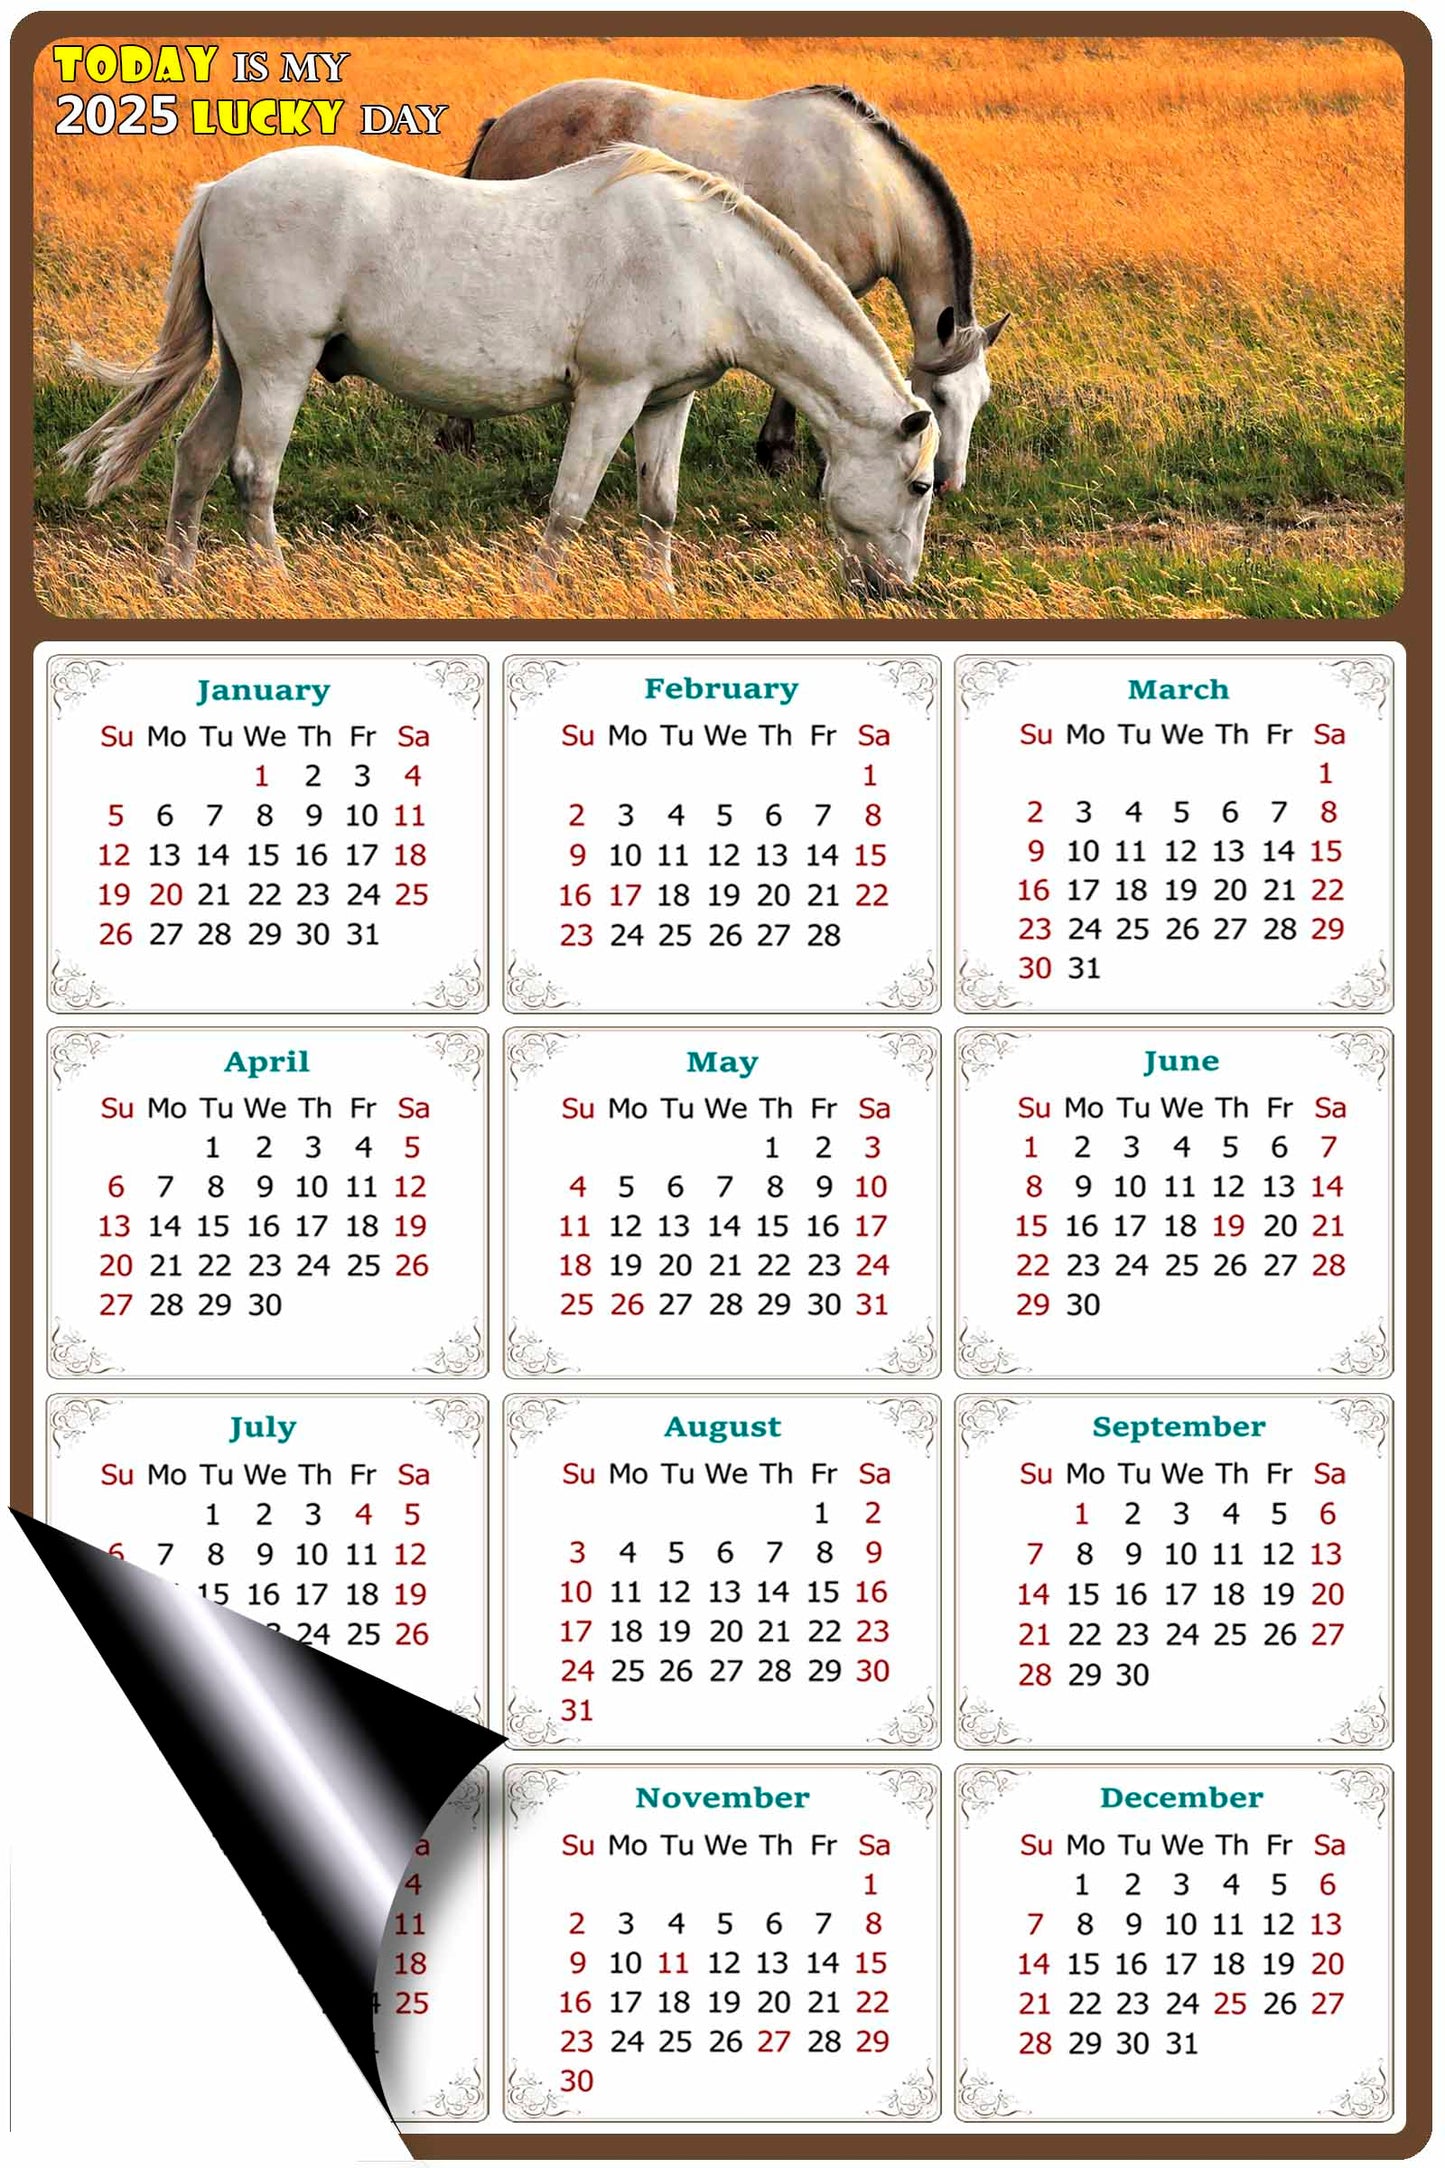 2025 Magnetic Calendar - Calendar Magnets - Today is my Lucky Day - (Fade, Tear, and Water Resistant) - Horses Themed 013